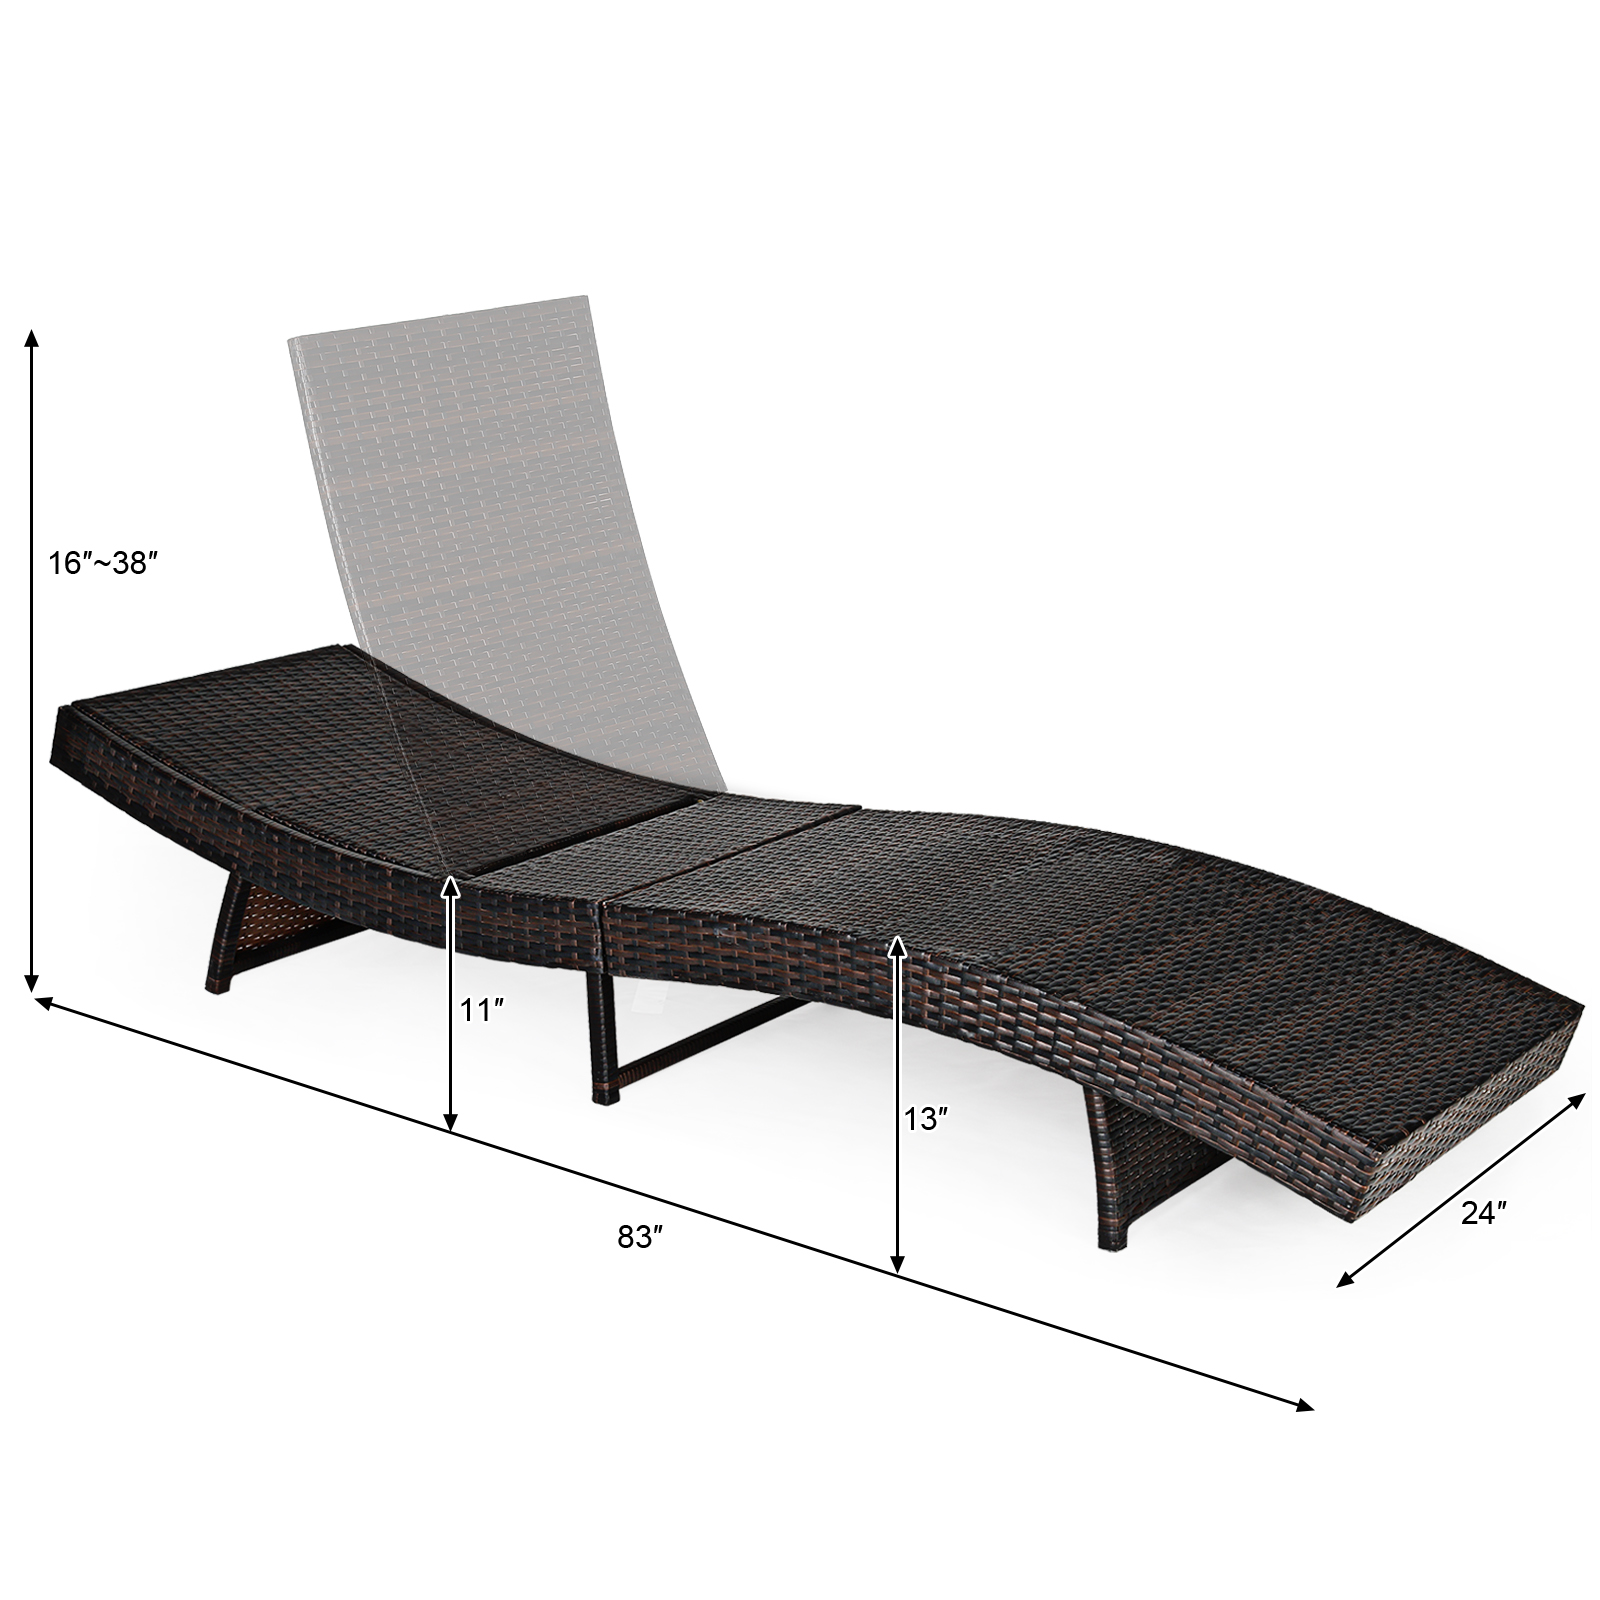 Patiojoy Patio Adjustable Rattan Chaise Lounge Chair Folding Reclining Wicker Chair - image 2 of 10